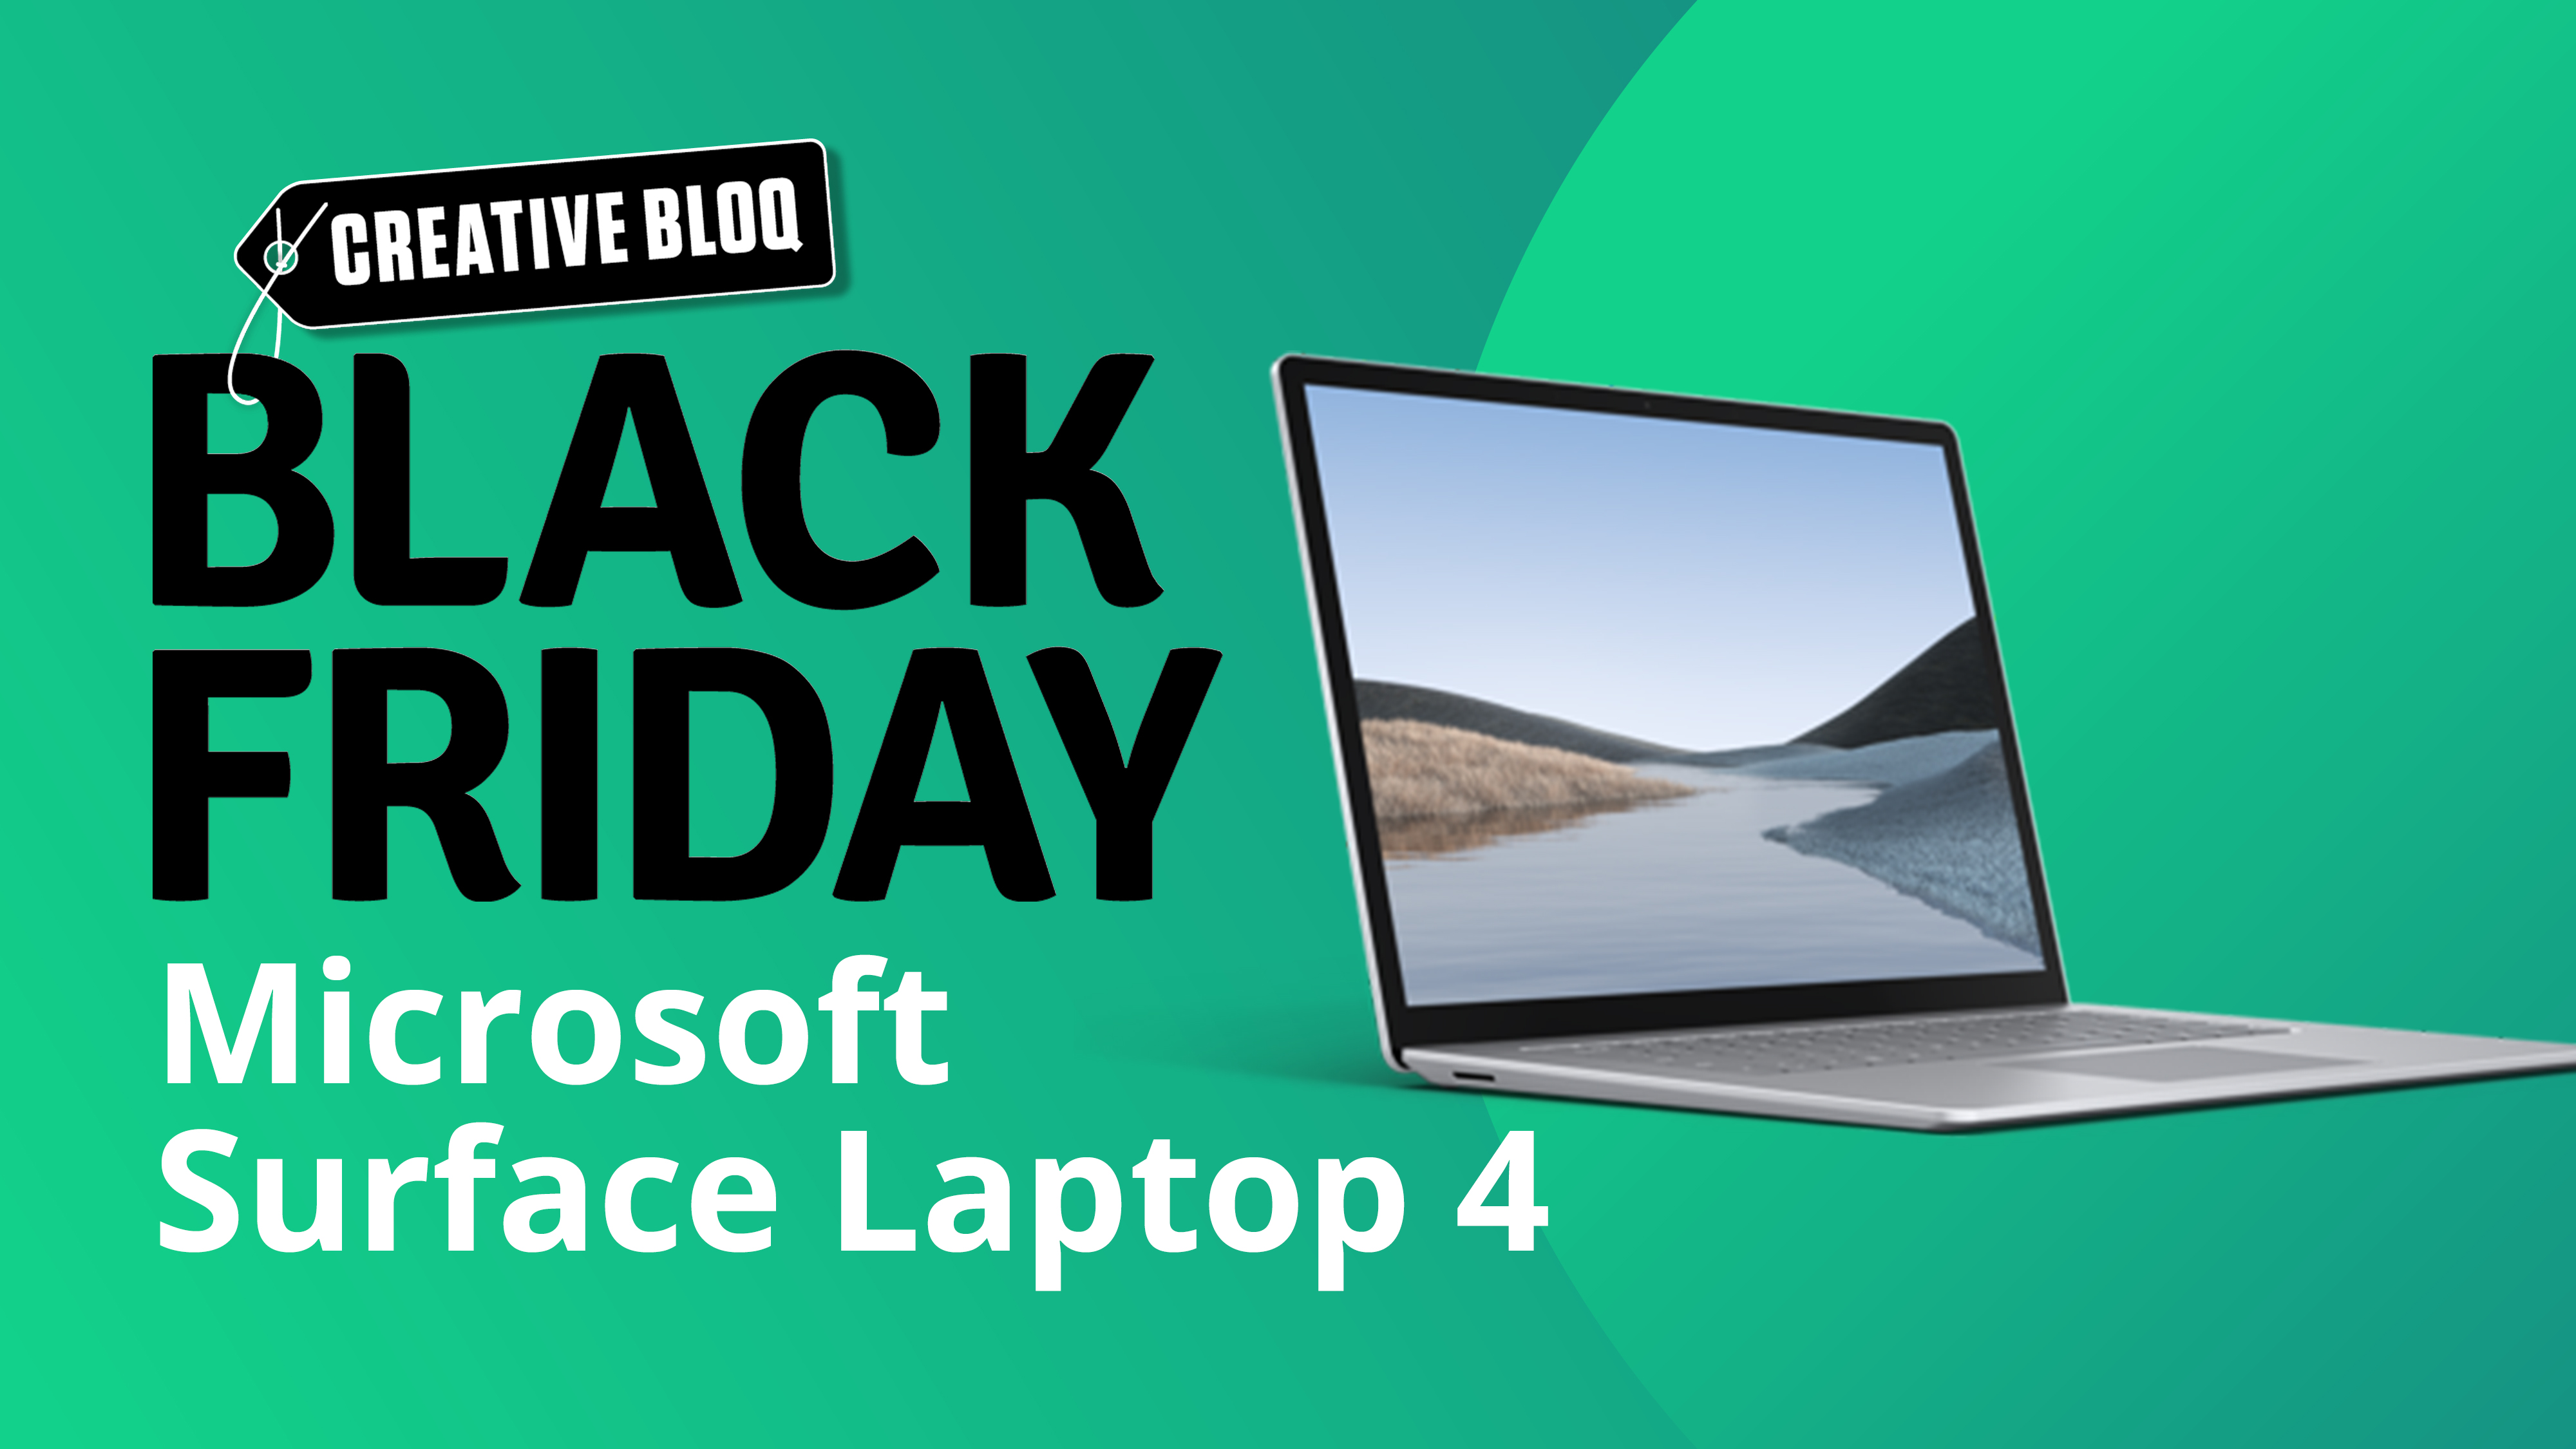 An image of the Microsoft Surface Black Friday deal, featuring a Microsoft Surface Laptop 4 on a green background